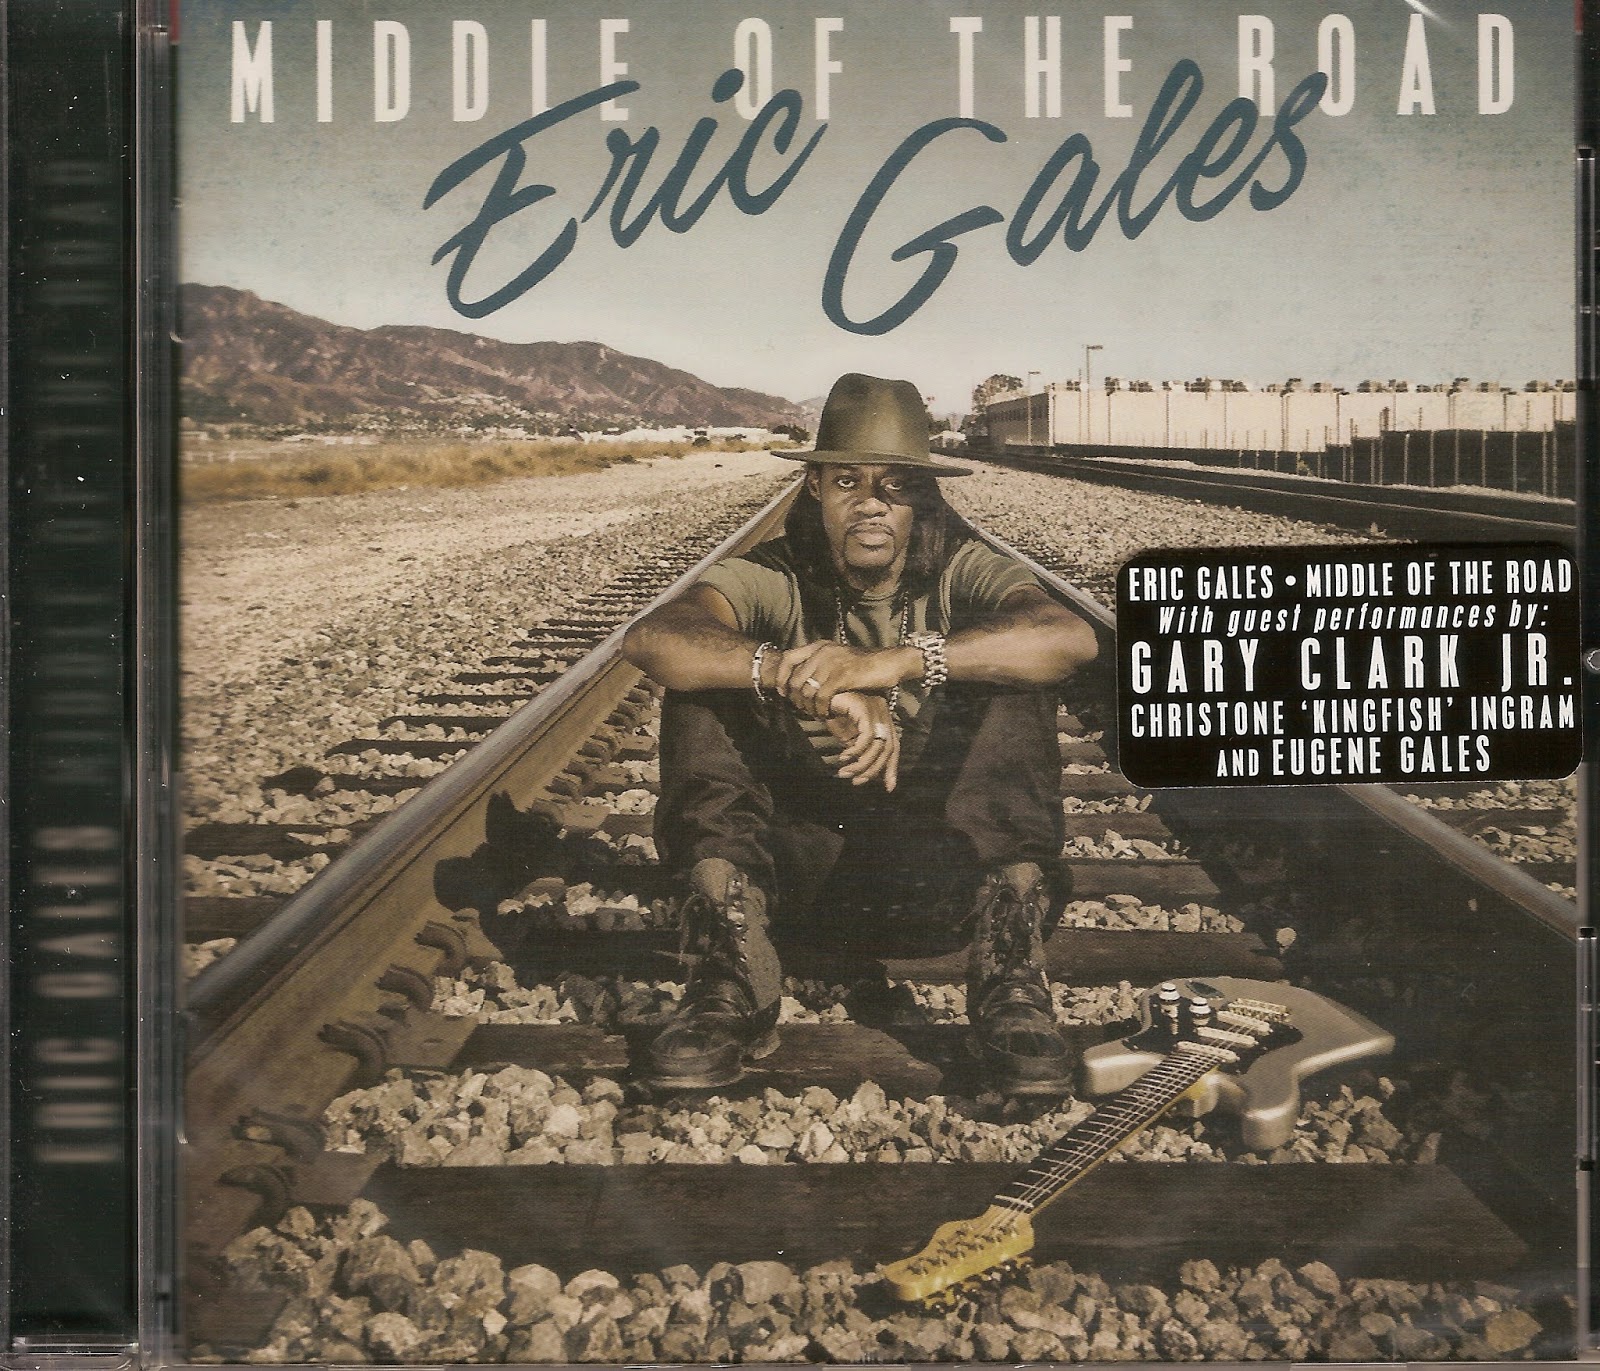 Middle of the road mp3. Middle of the Road Eric Gales. Eric Gales фото. Eric Gales - Crystal Vision. Carry yourself Eric Gales.